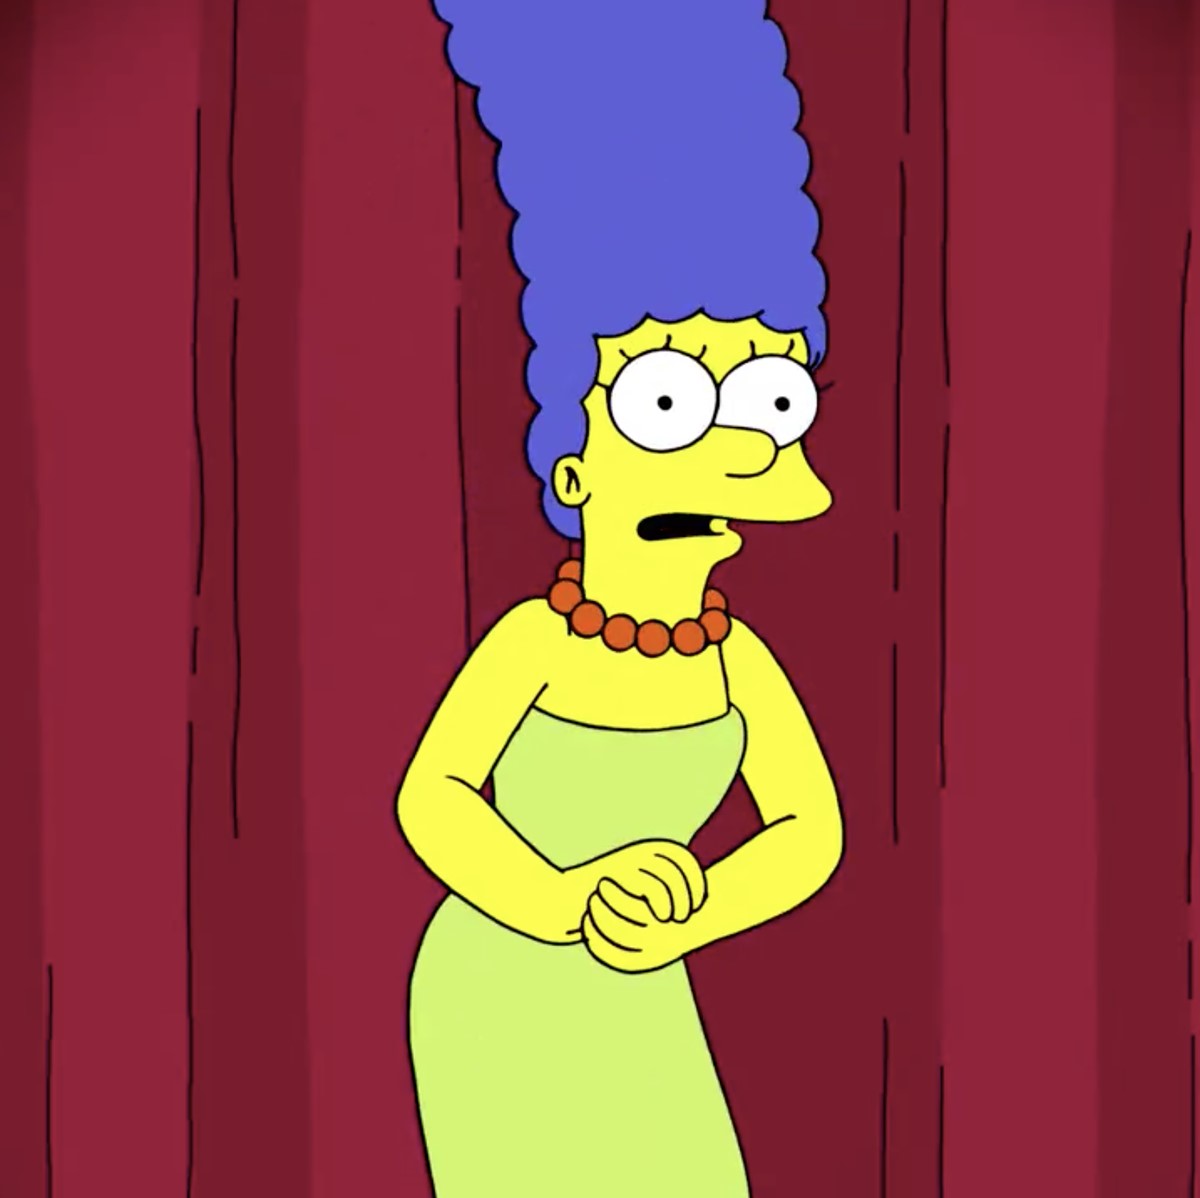 10 Facts About Marge Simpson The Simpsons 